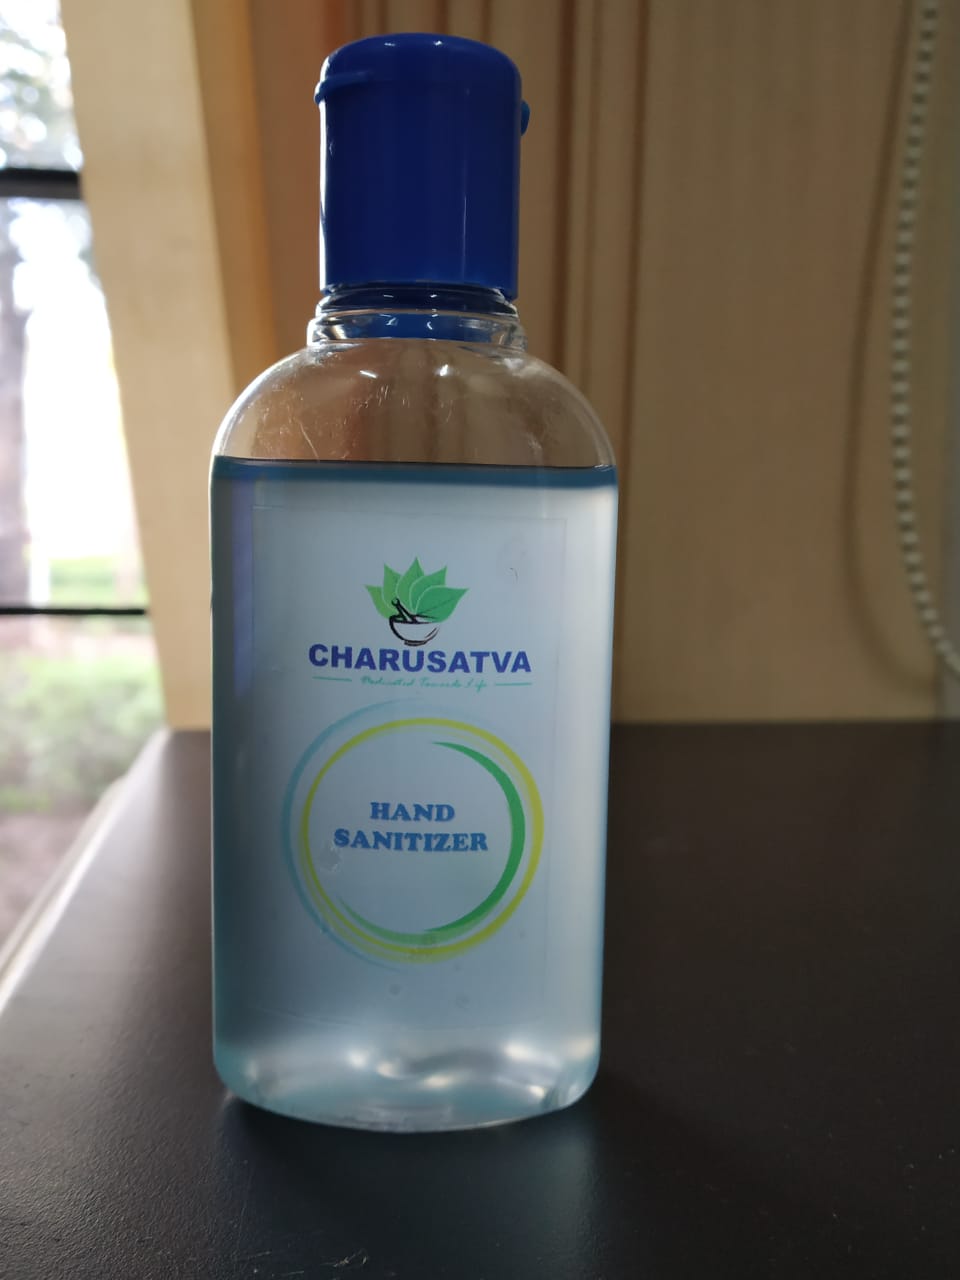 CHARUSAT launched a hand sanitizer ‘Charusatva’ for the safeguard against Corona Virus